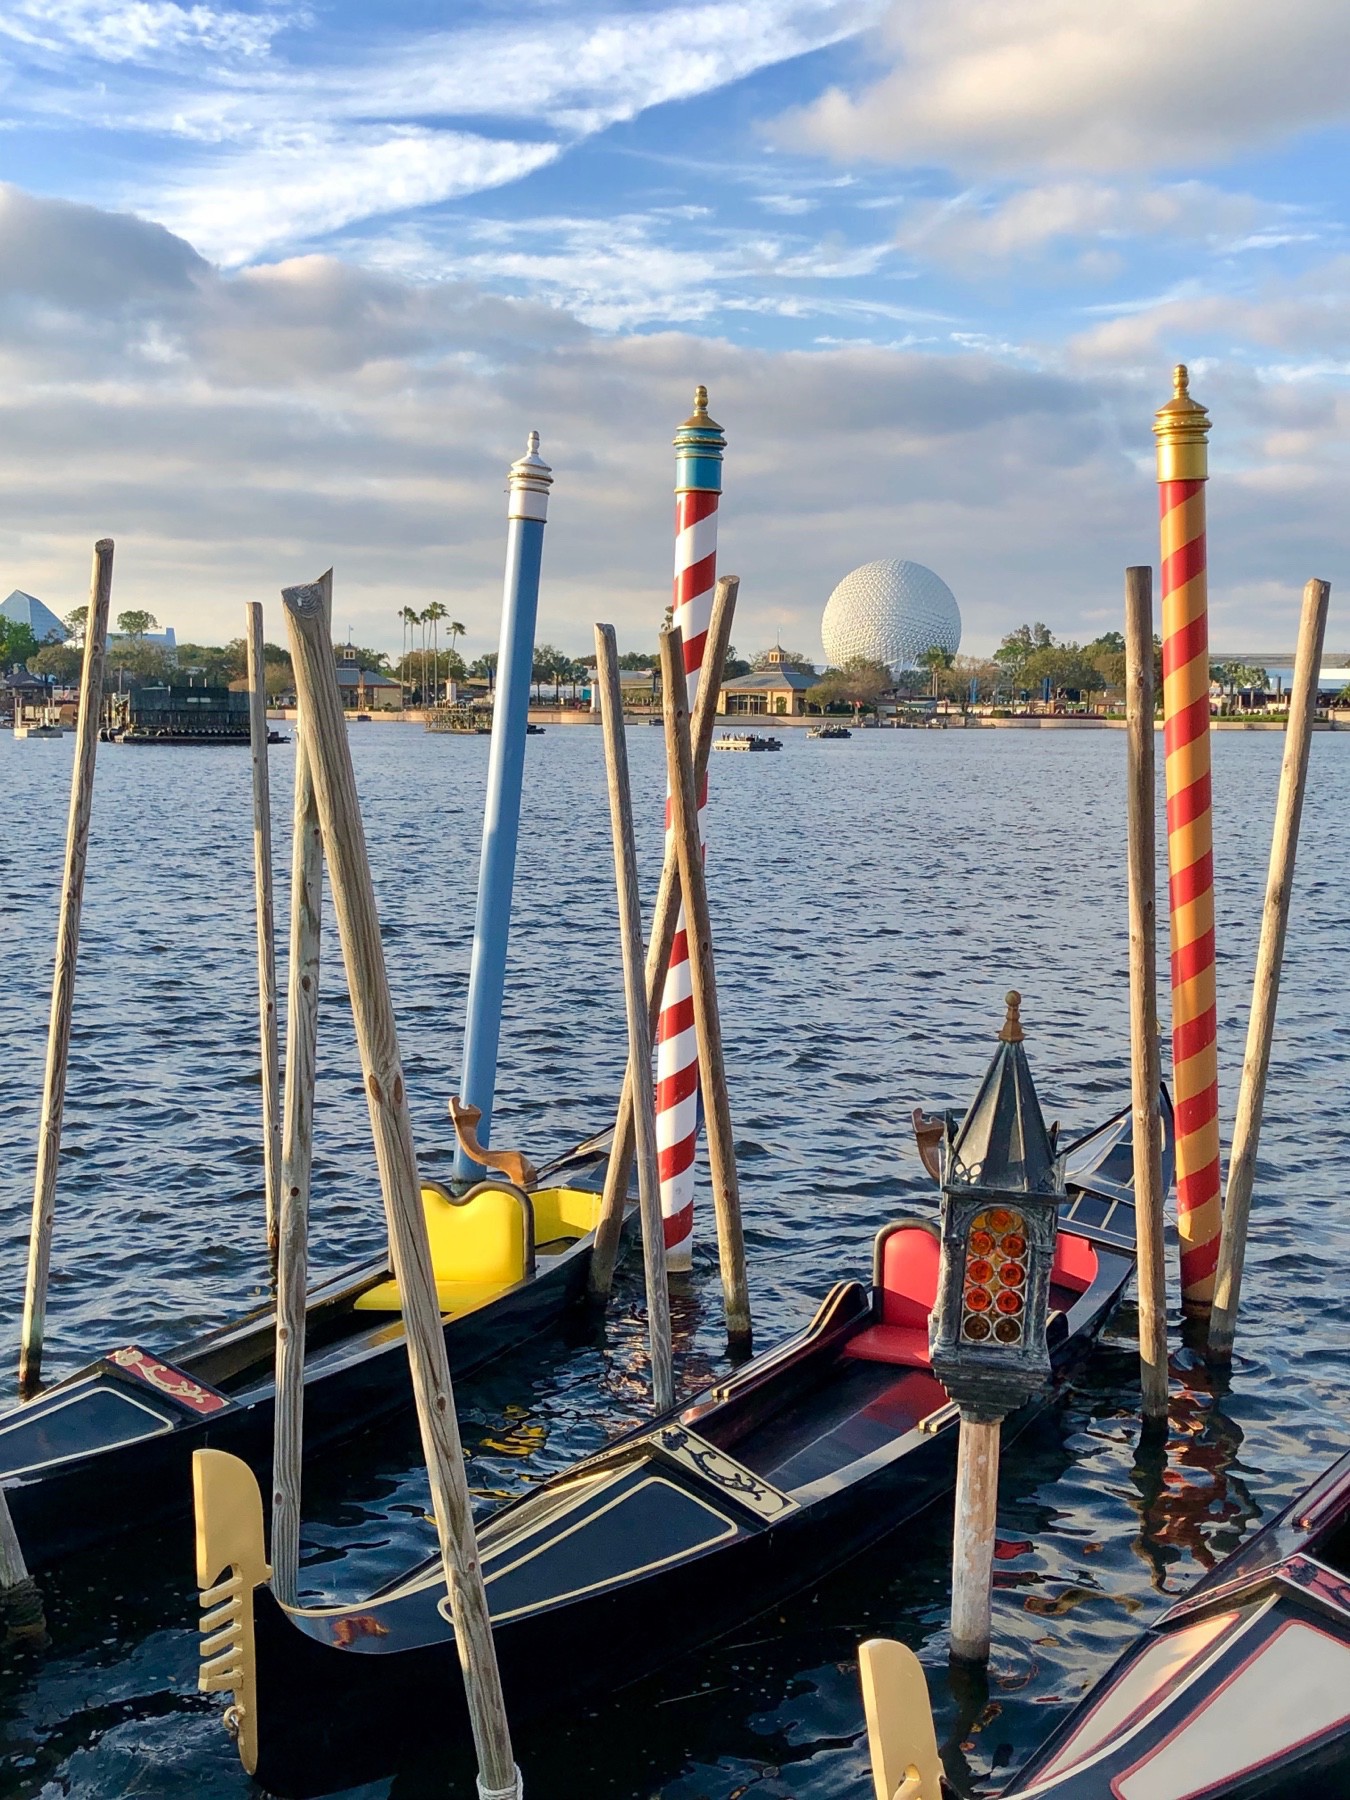 A small grouping of Italian gondolas at the bottom with Spaceship Earth in EPCOT seen near the top in the background.